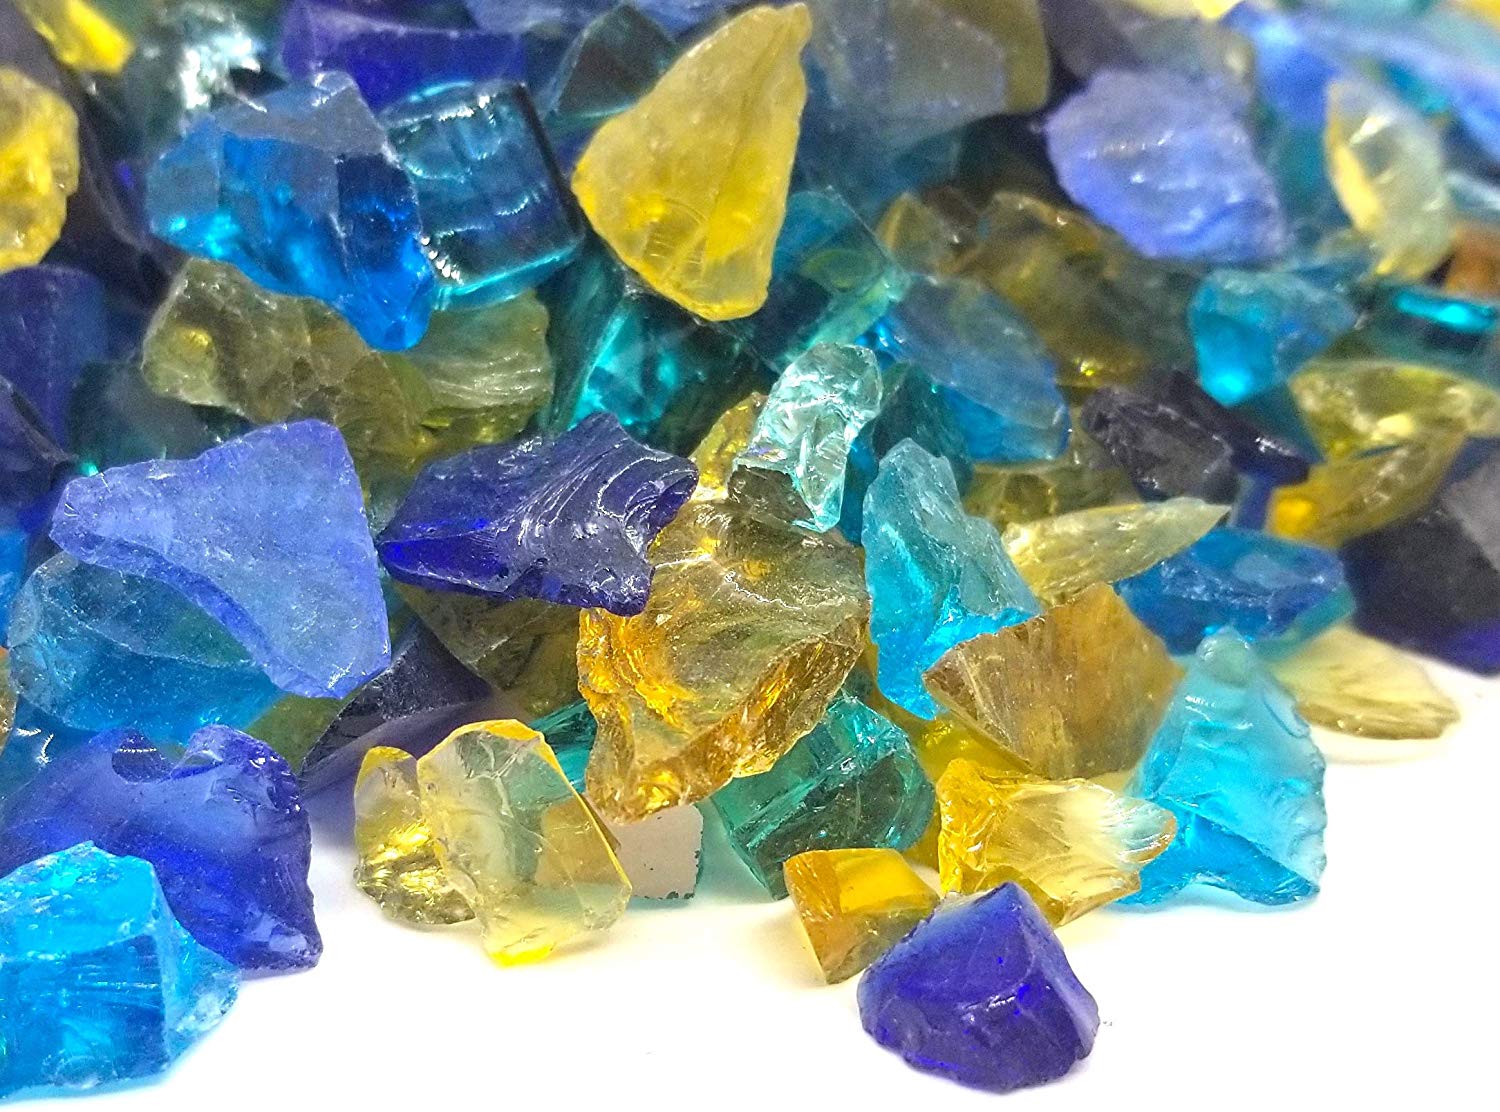 Royal Blue Yellow Teal Blend 1/2" - 3/4" Large Premium Fire Glass for Fireplace and Fire Pit